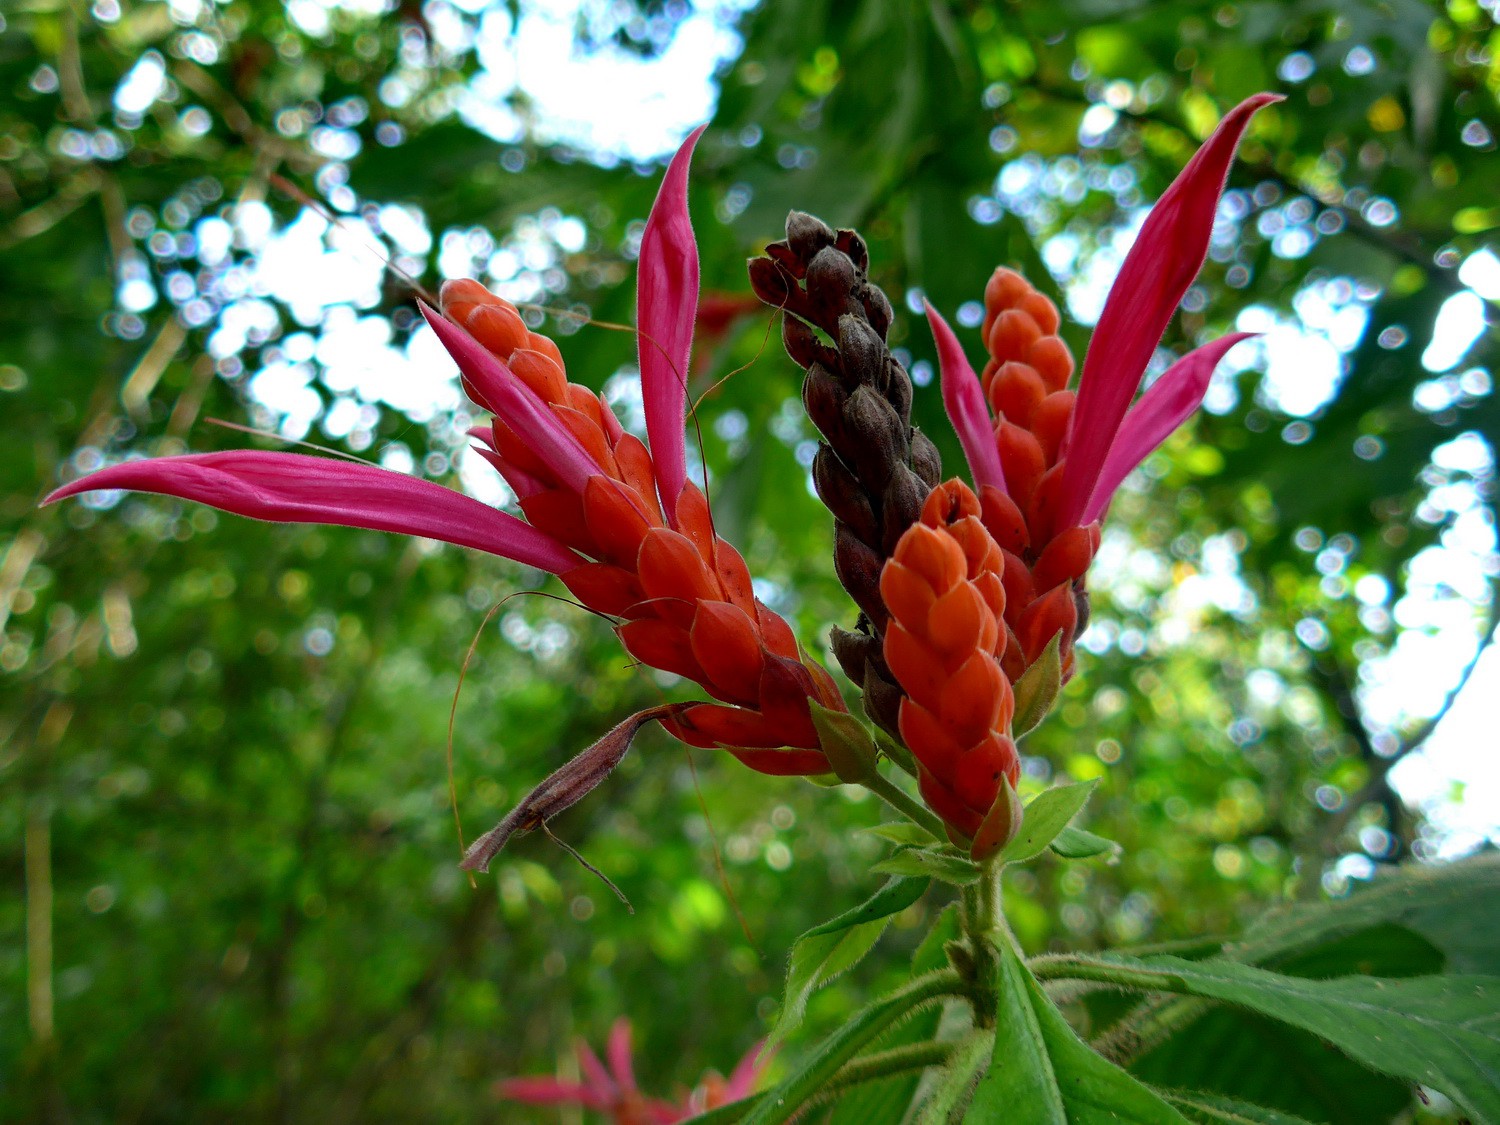 Flower in Gamboa (between Colòn and Panamà City)